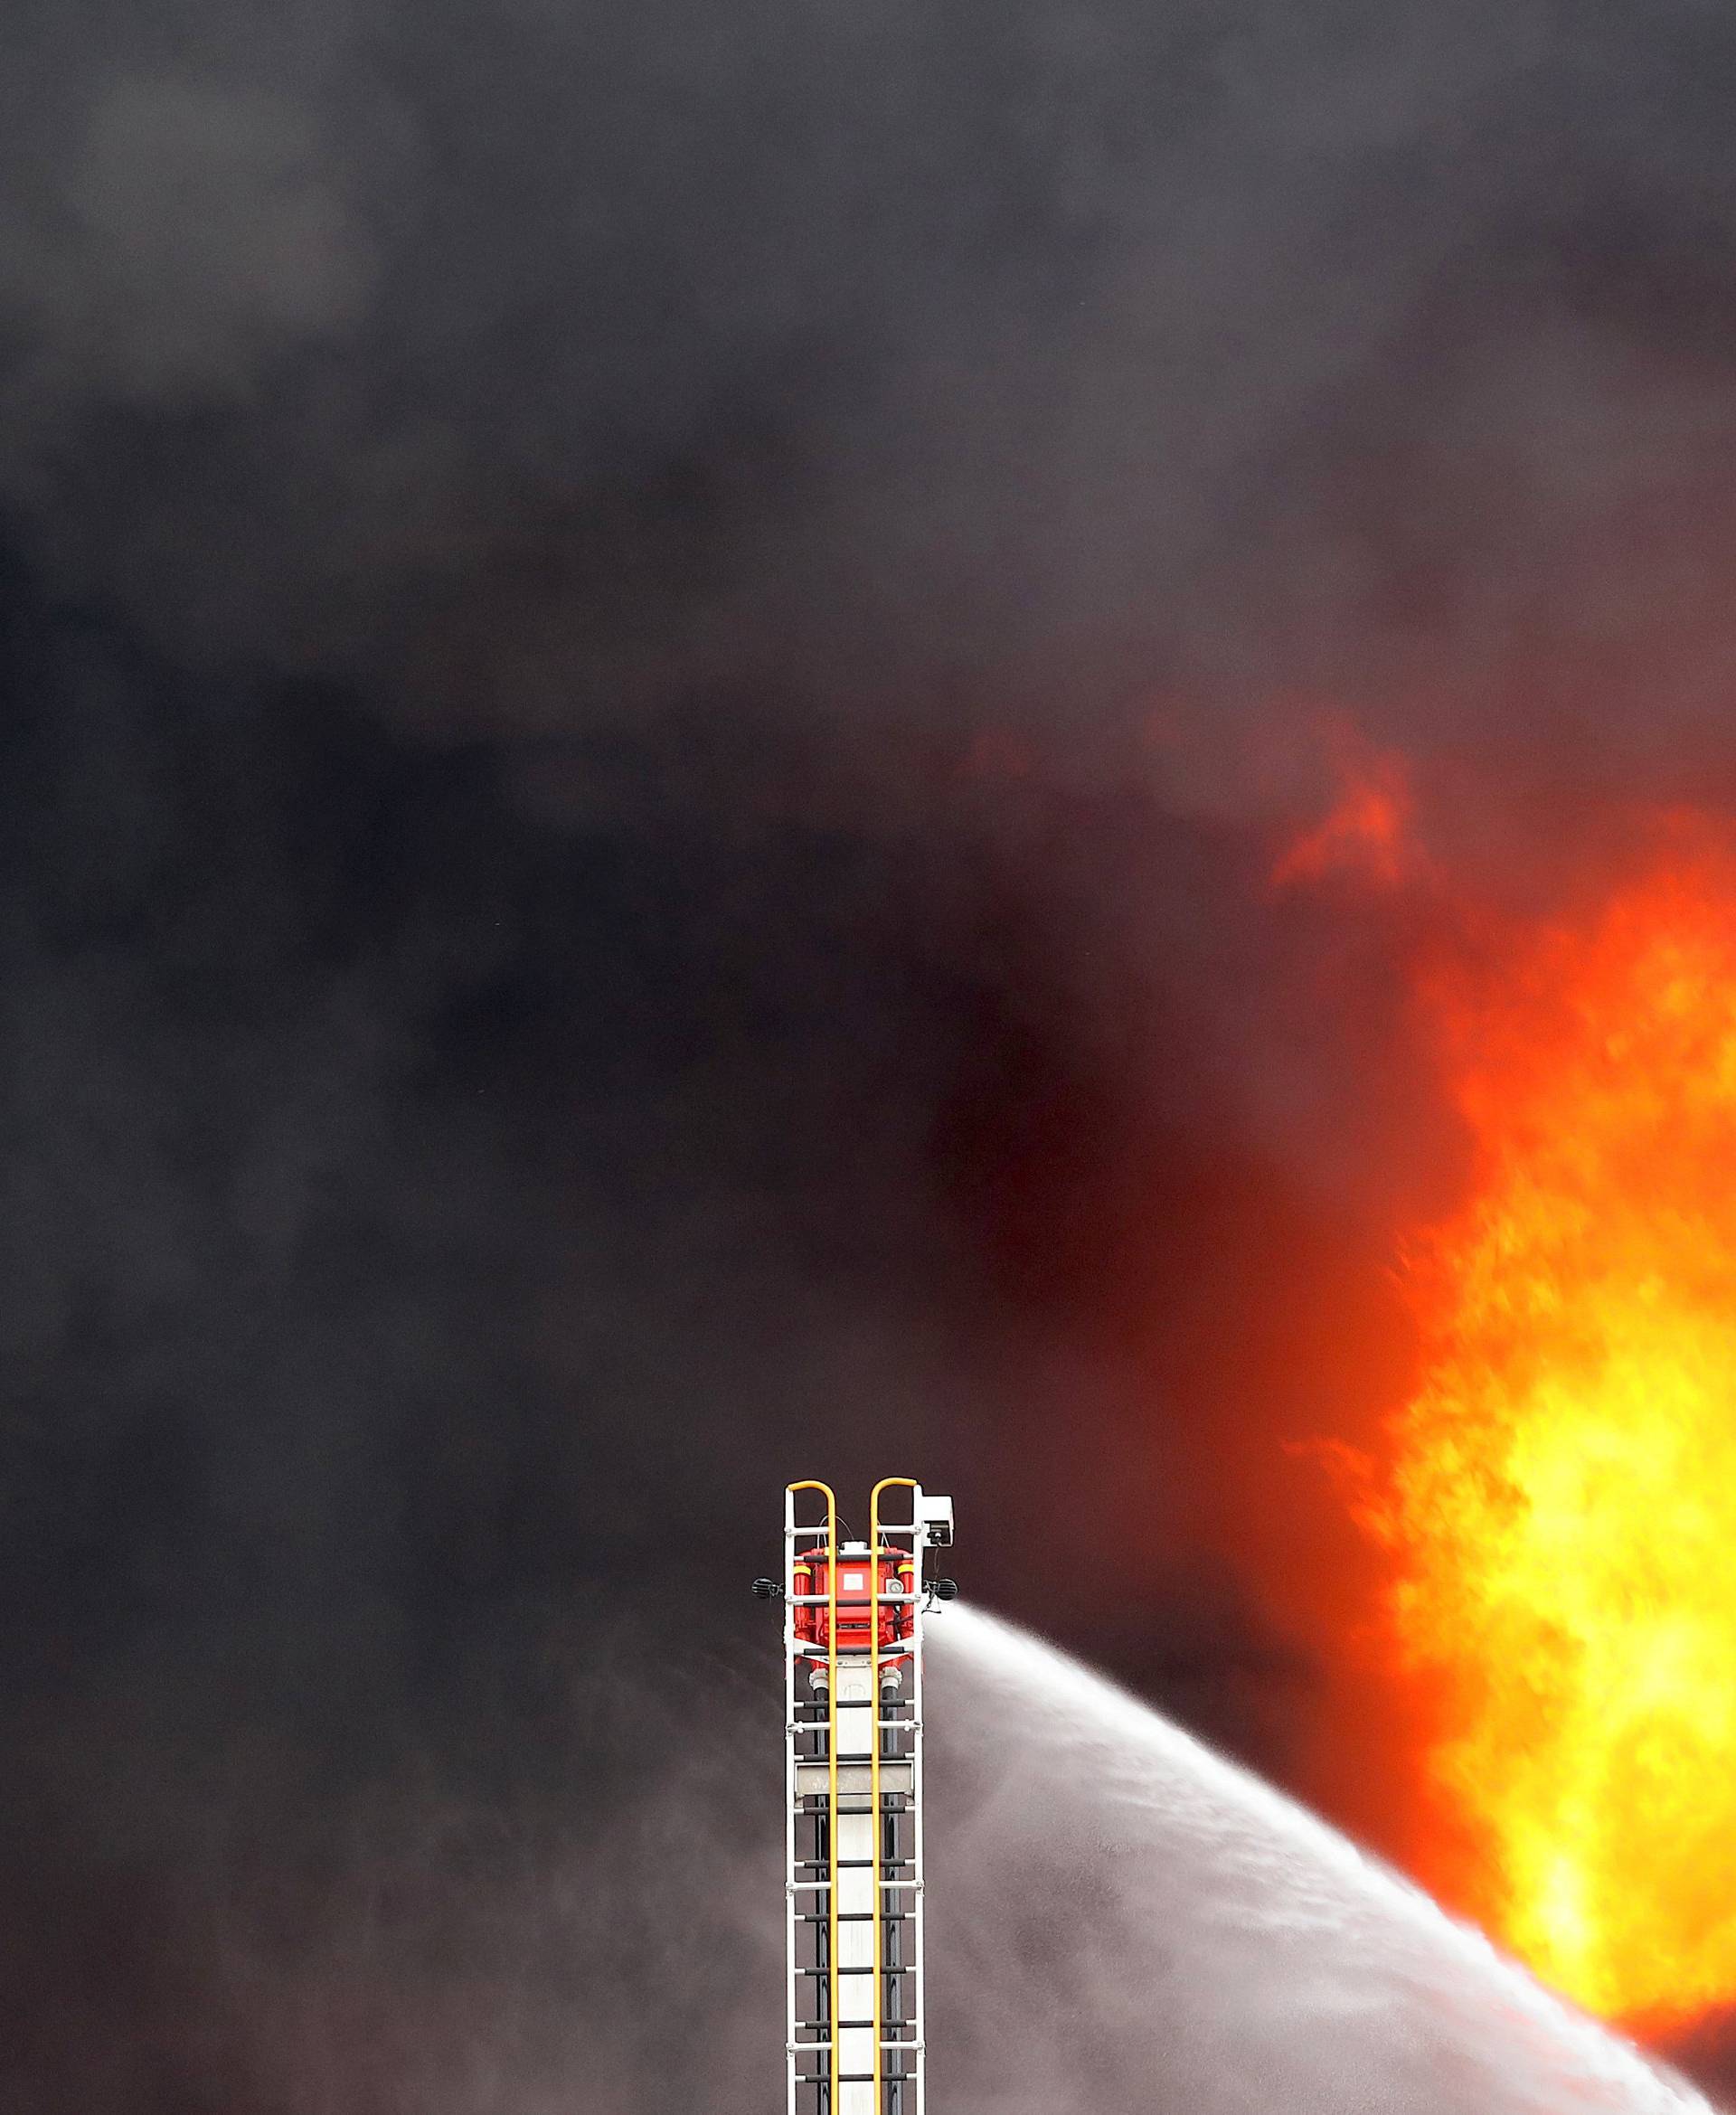 Fire crews operate a hose attached to a ladder at a fire in a factory in Melbourne